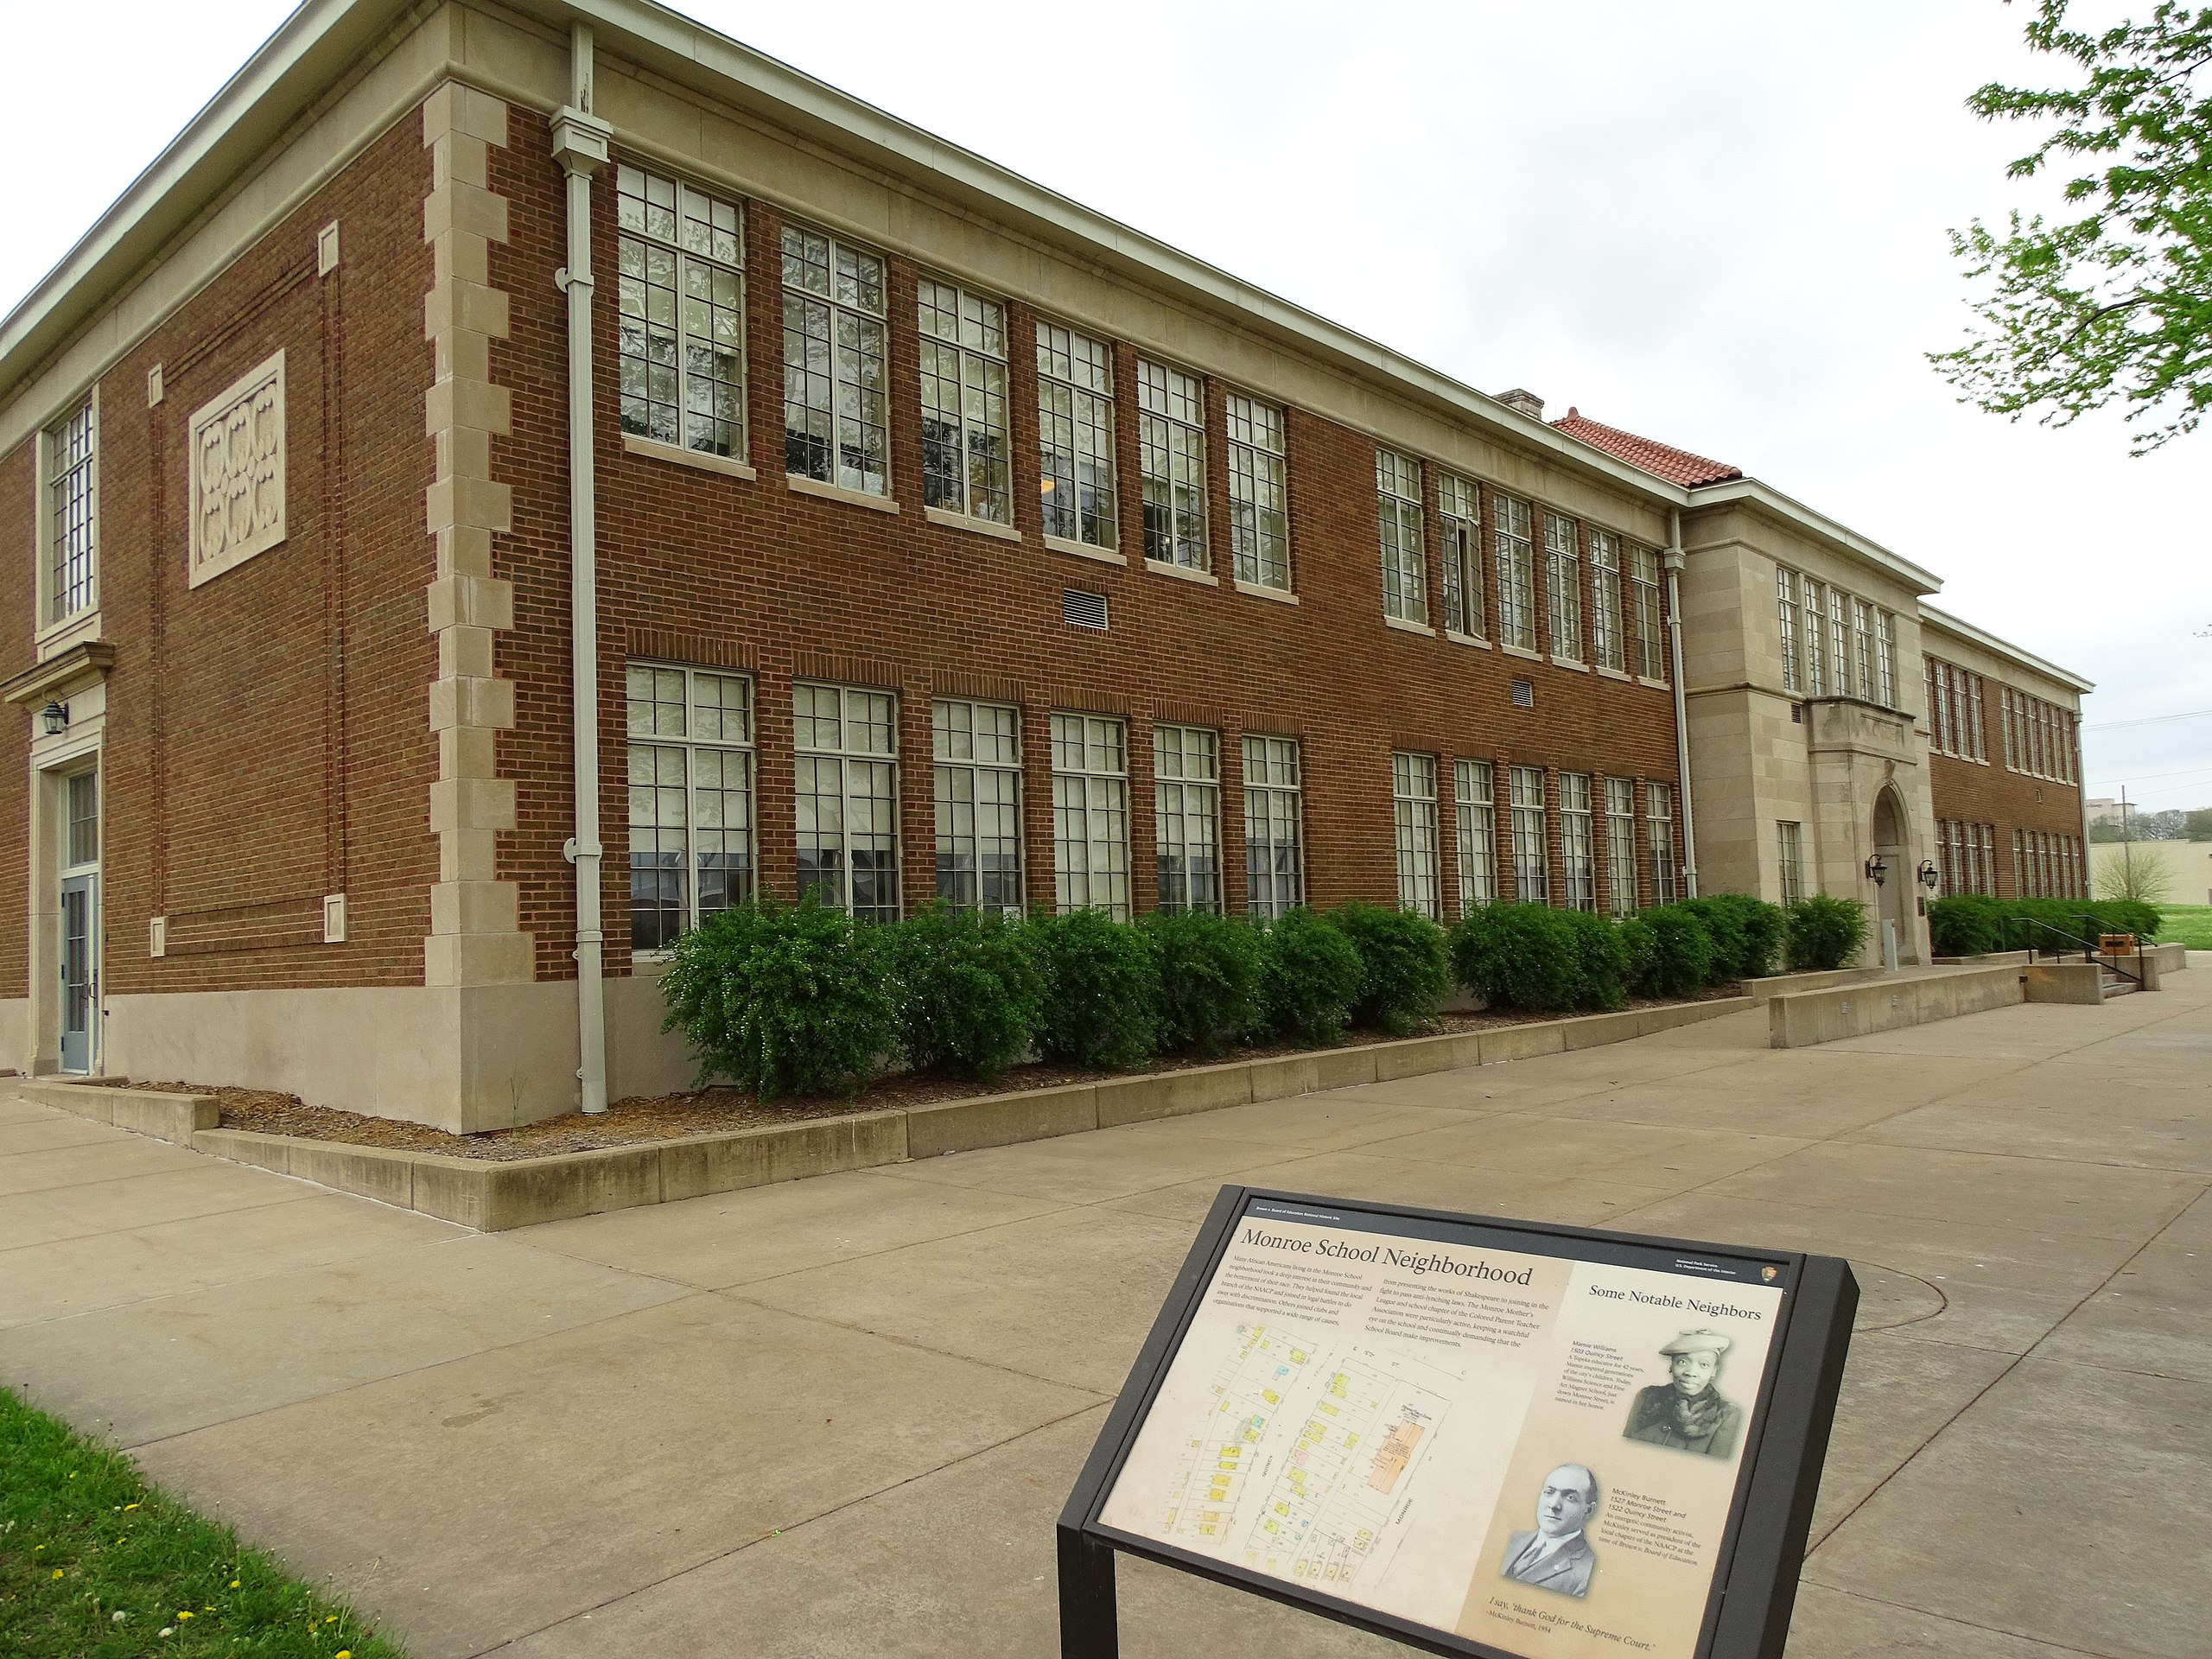 Monroe Elementary School is a national historic site as part of Brown v. Board of Education | Historic Sites In Kansas